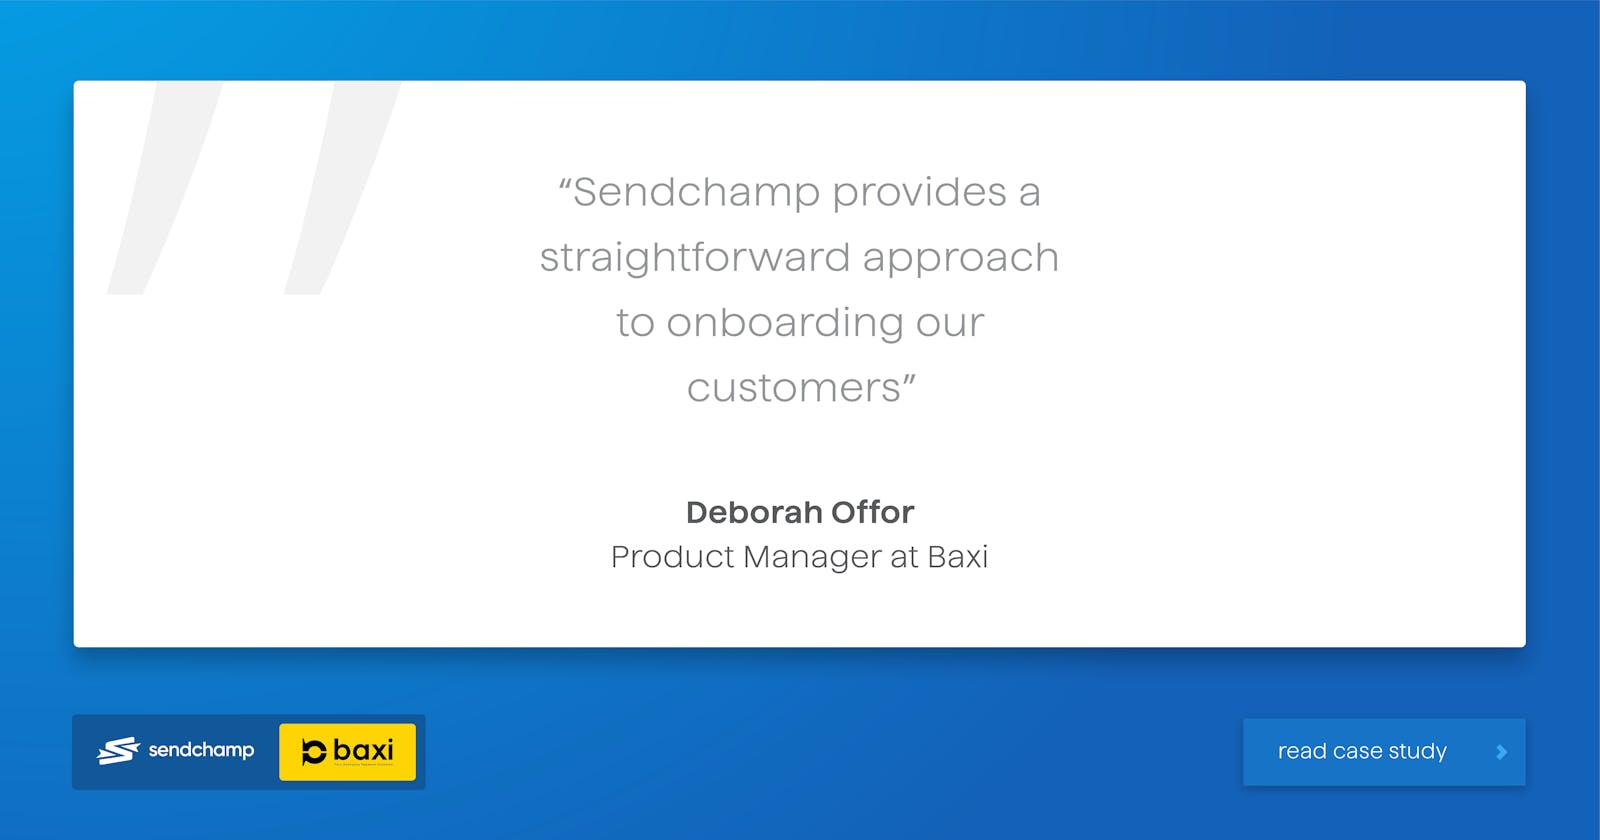 How Baxi Uses Sendchamp to Accelerate Customer Verification and Onboarding